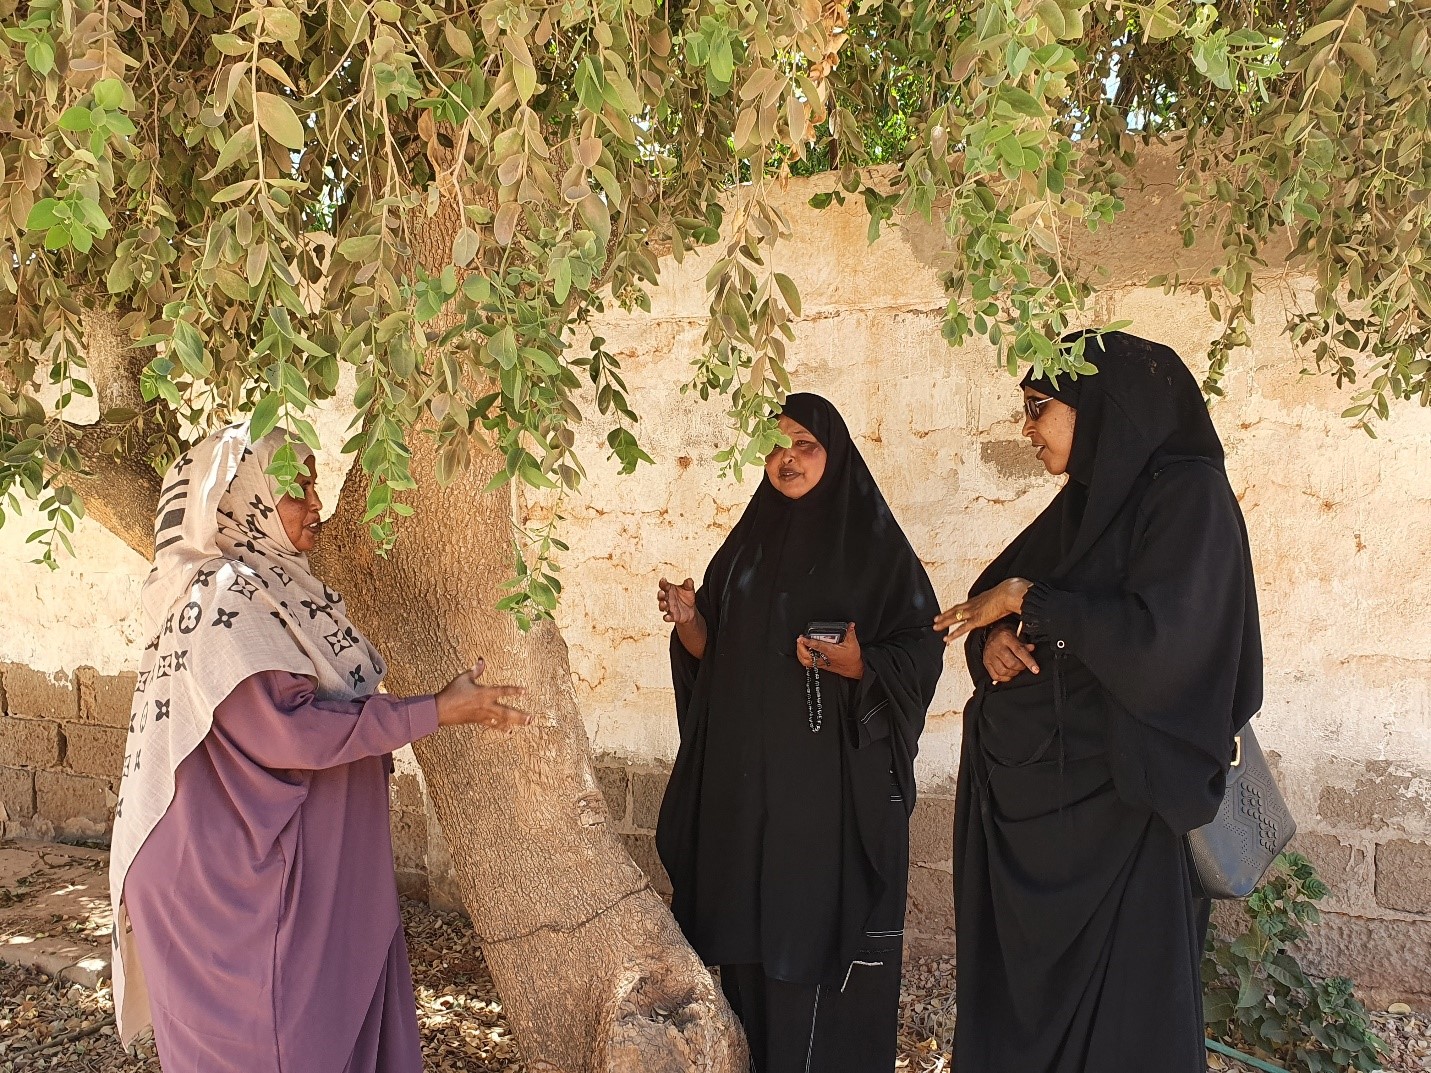 women discussing under a tree